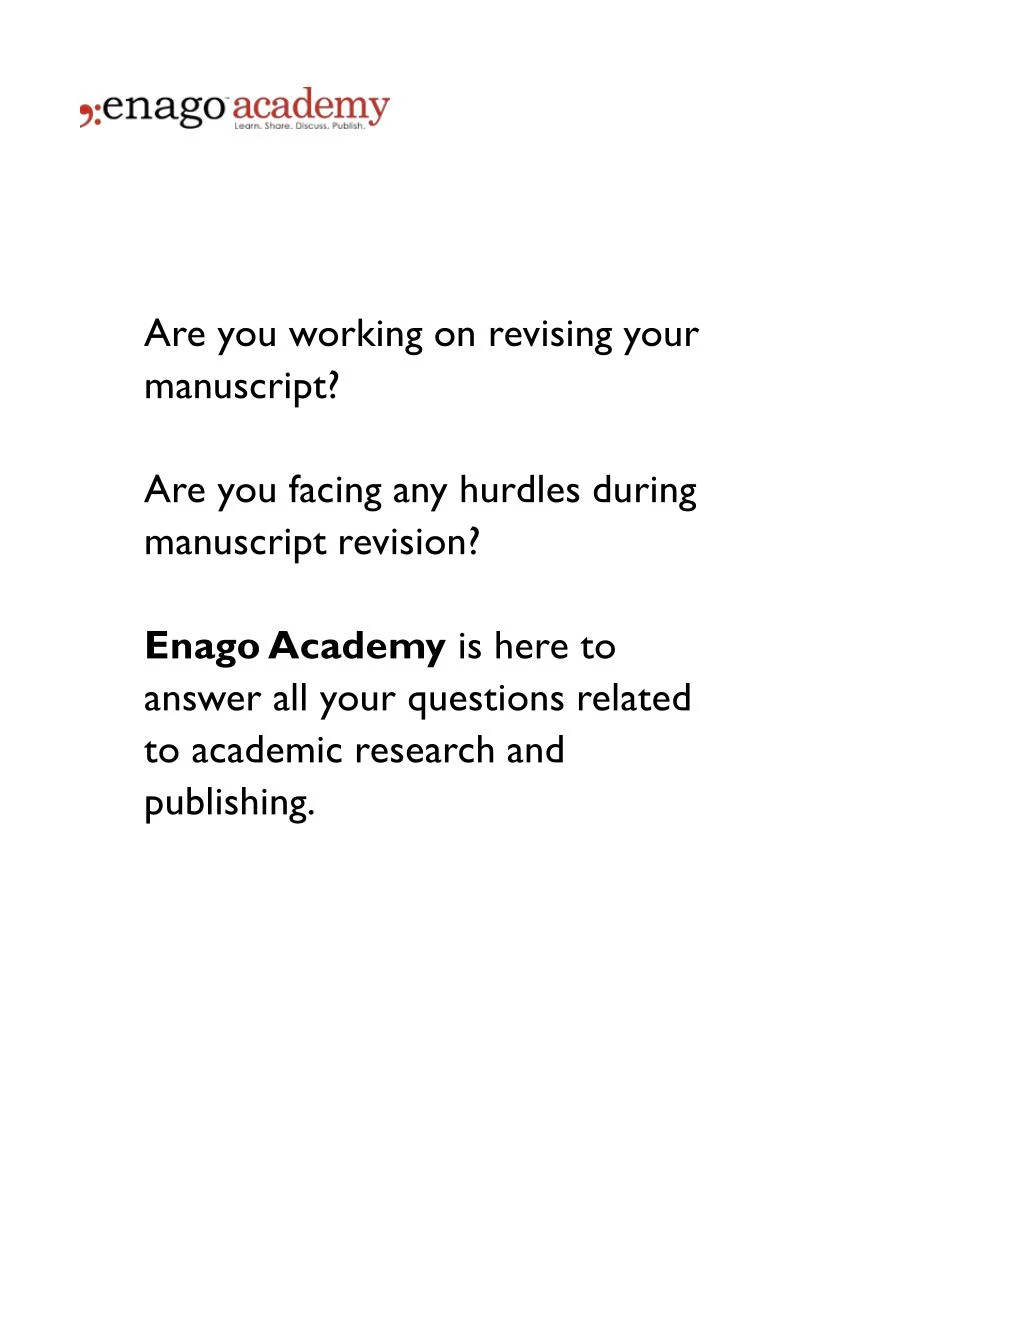 are you working on revising your manuscript